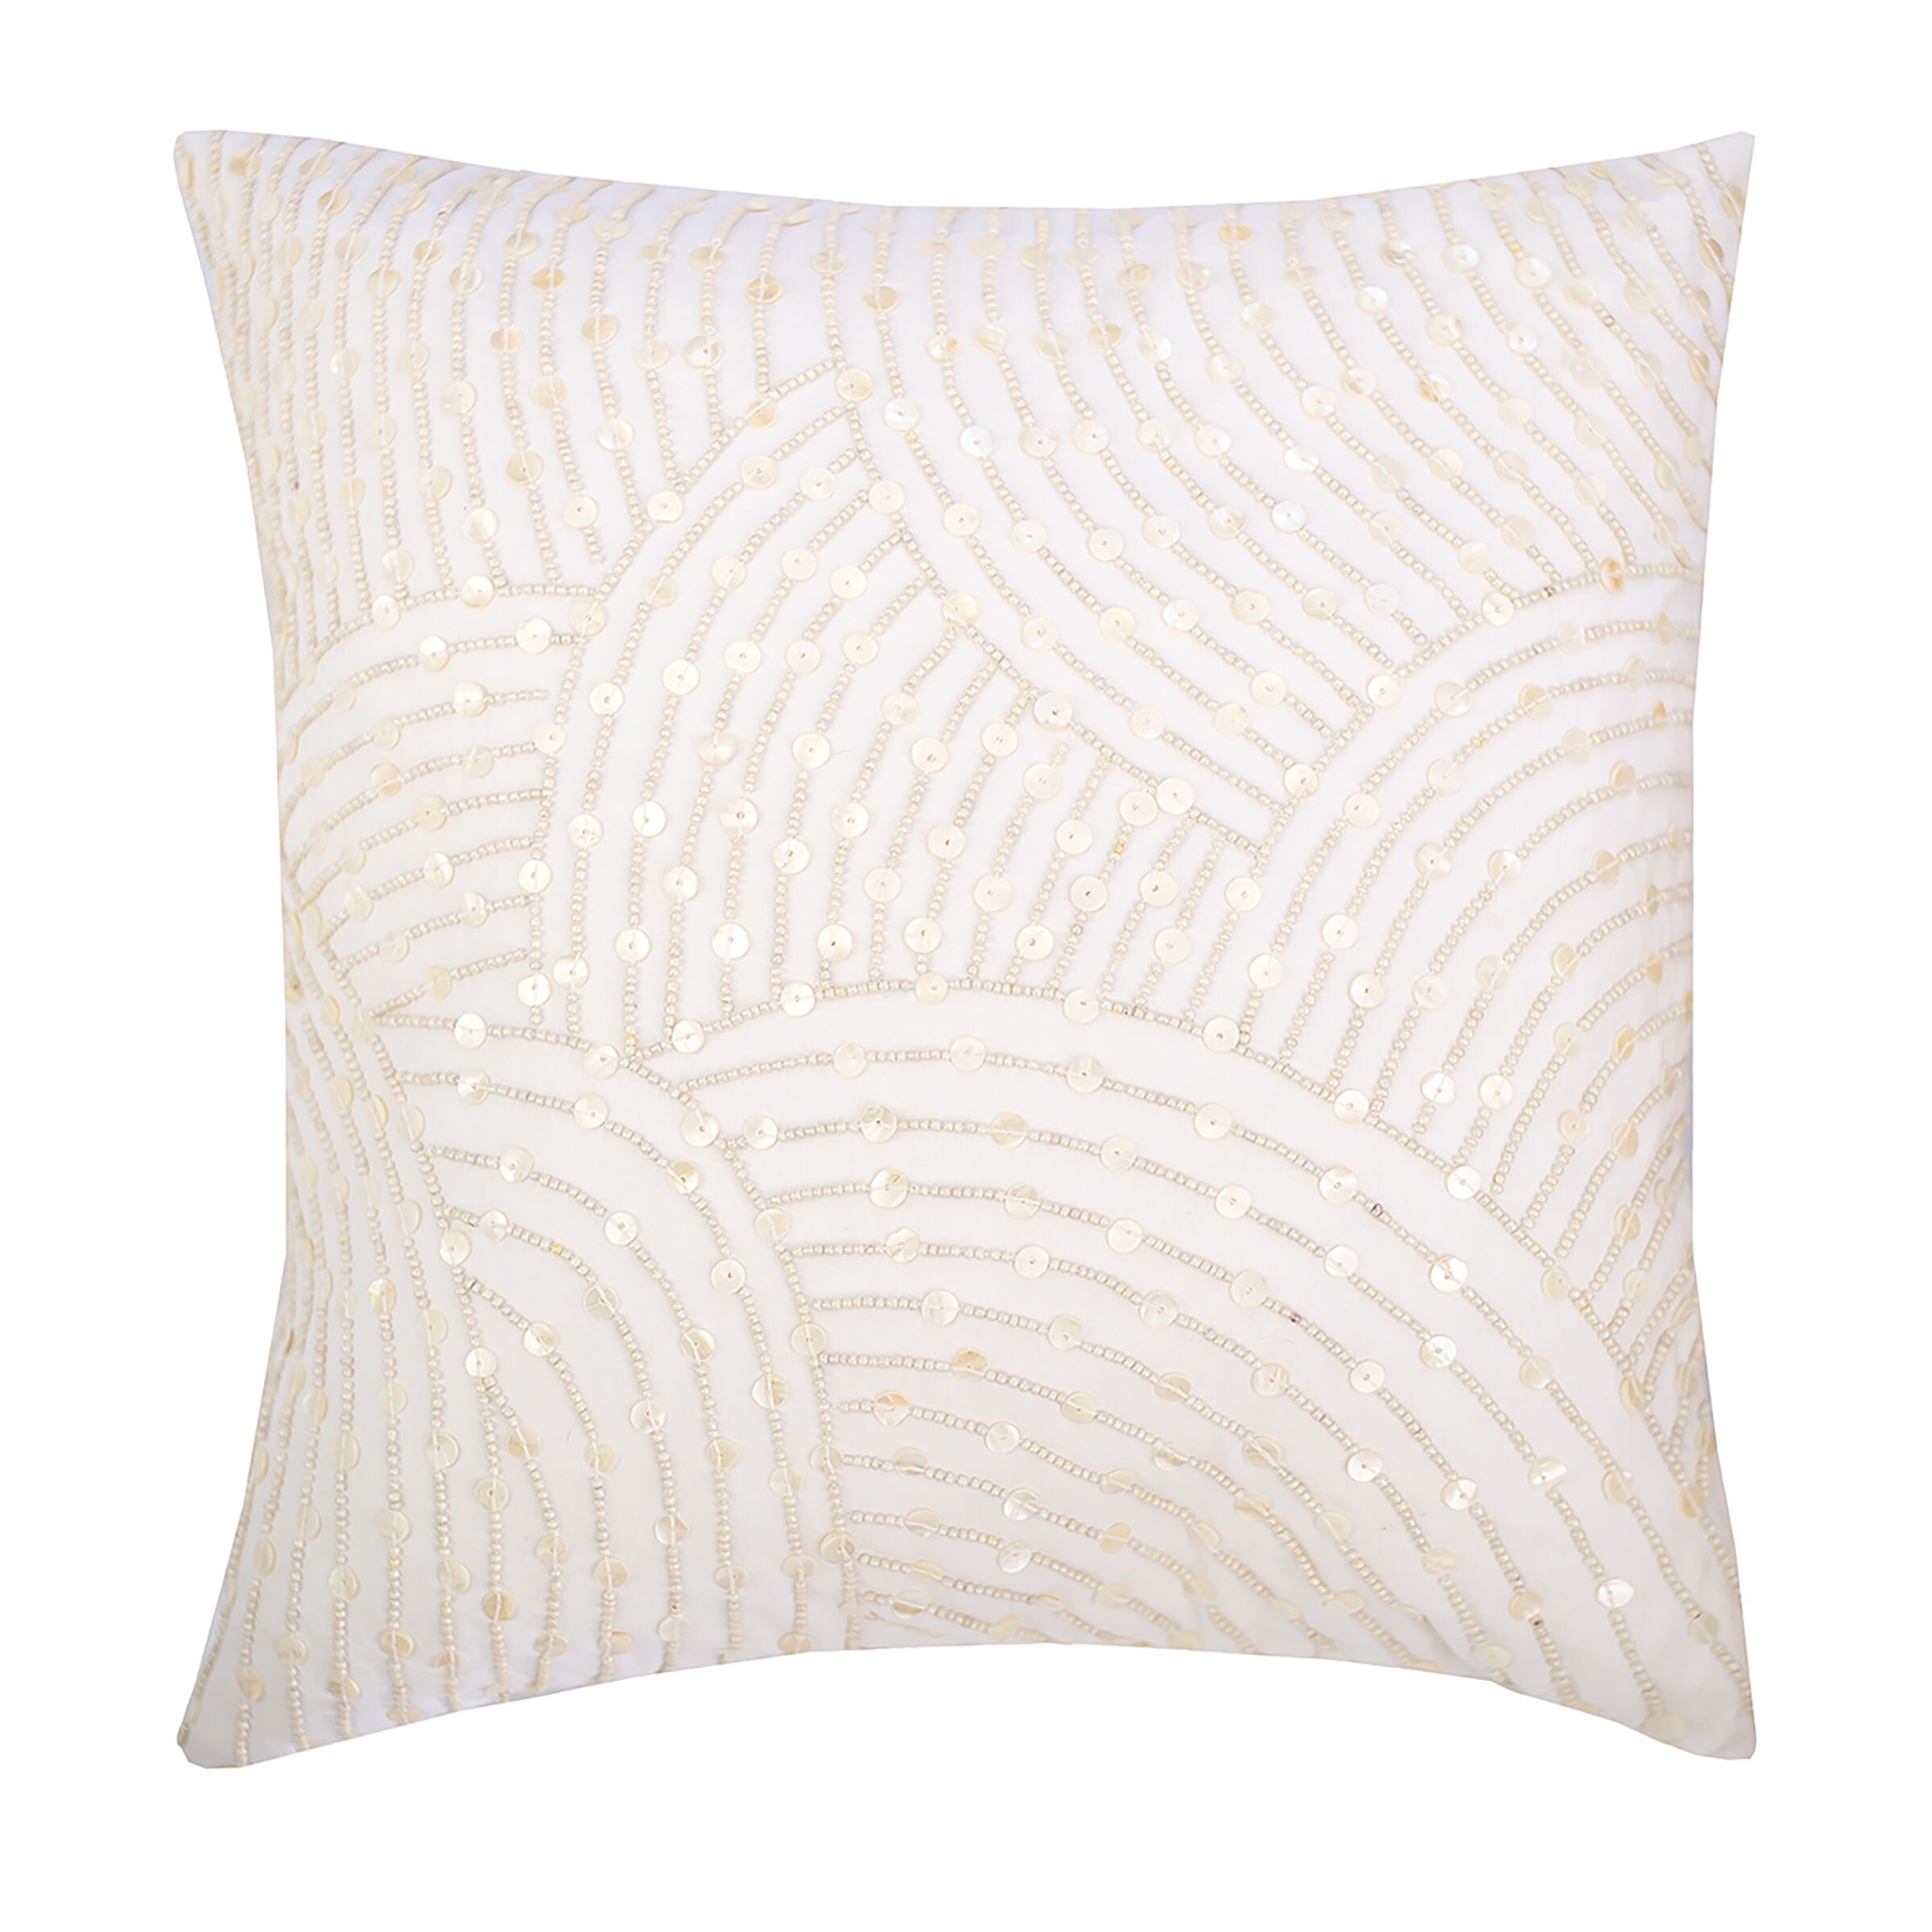 ABSTRACTIONS - PEARL TOSS PILLOW, 18x18